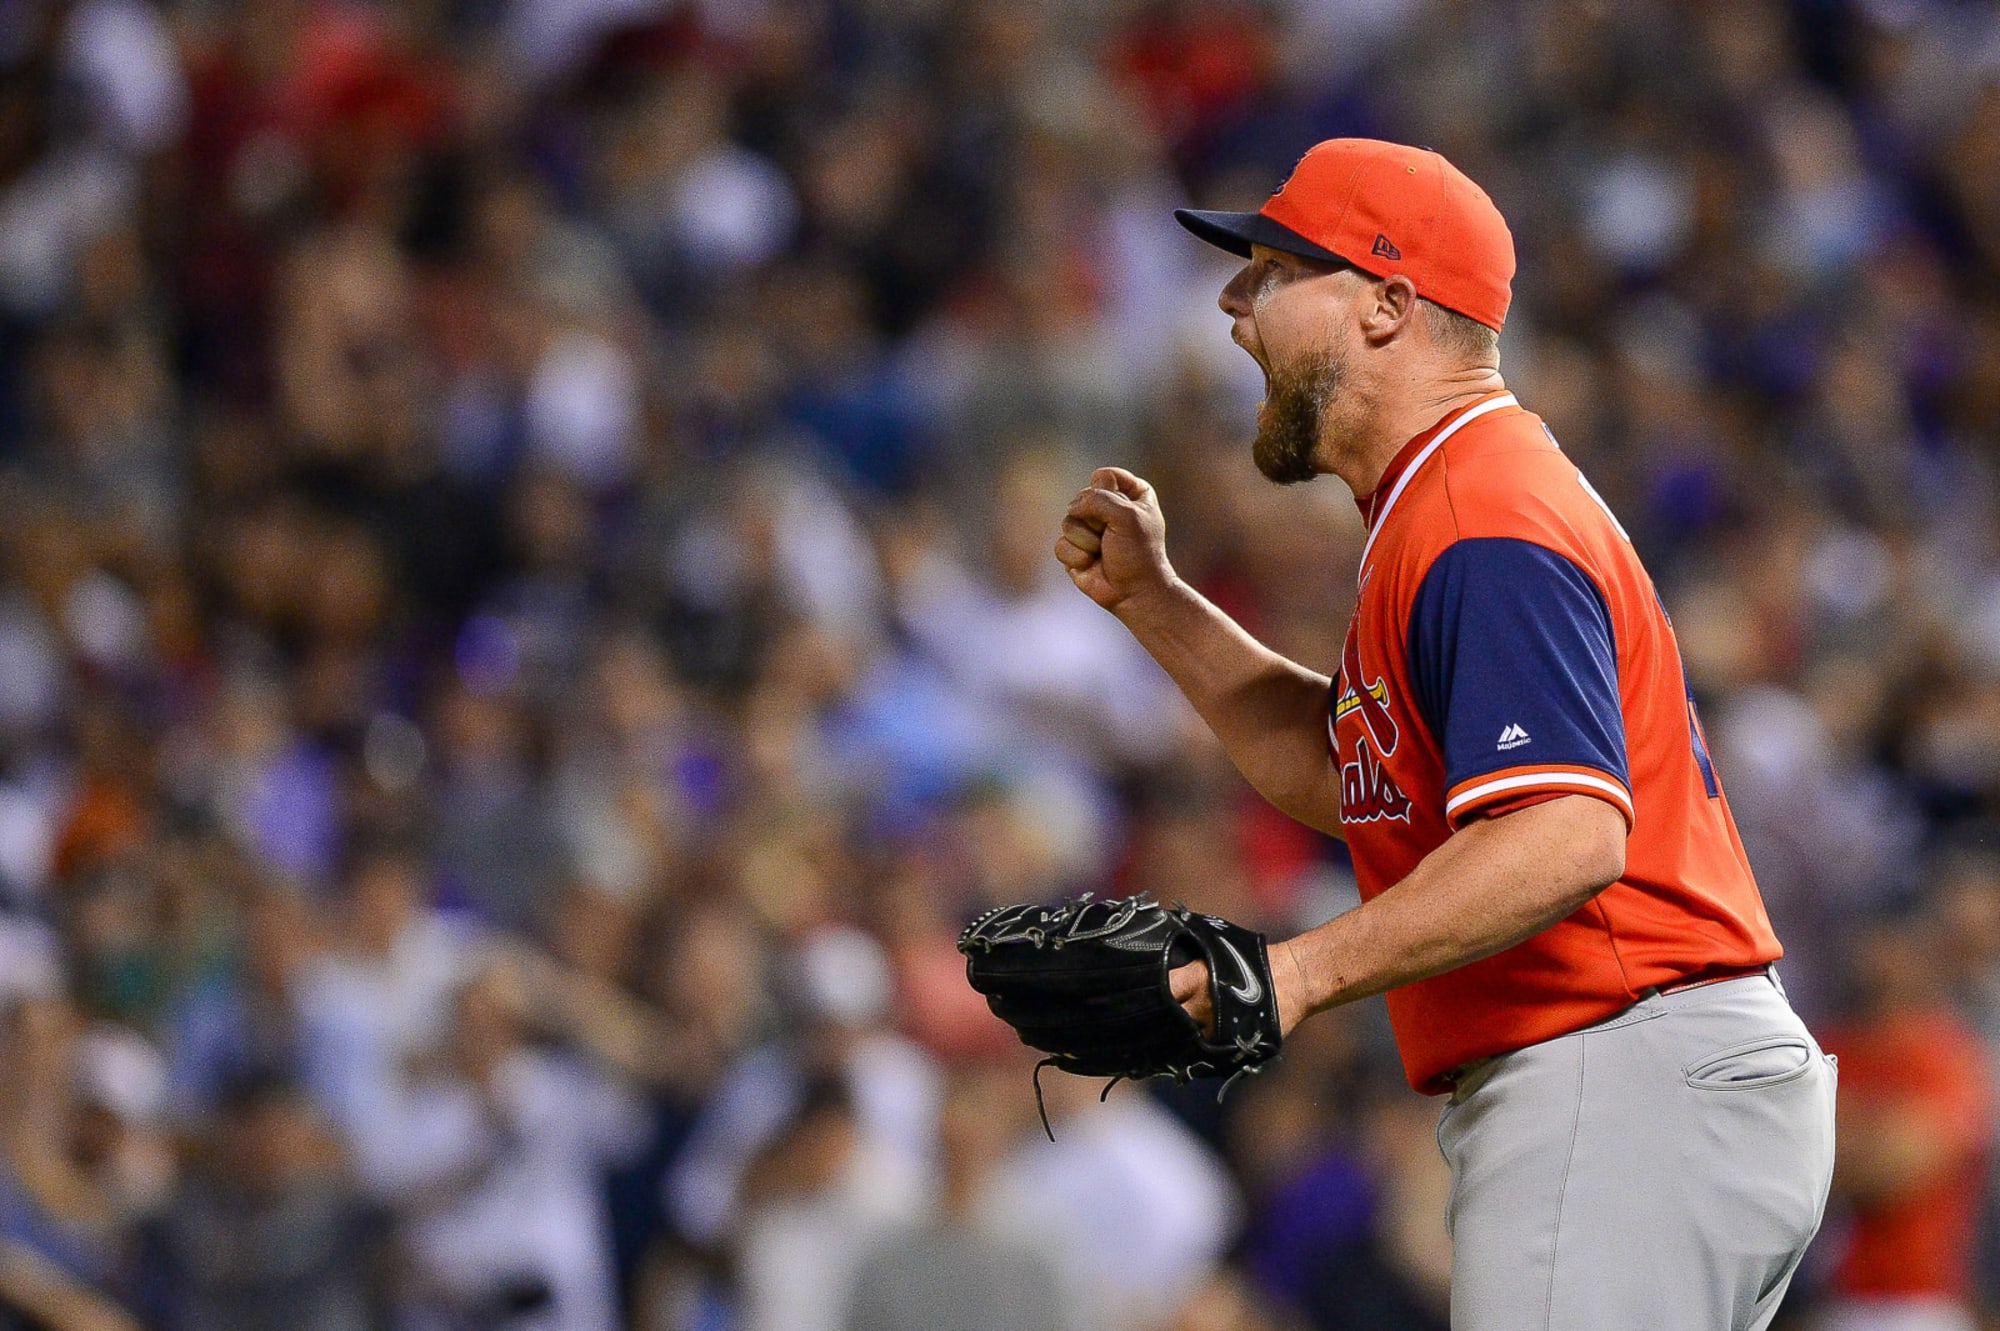 St. Louis Cardinals: Where is your best, Mr. Bud Norris?